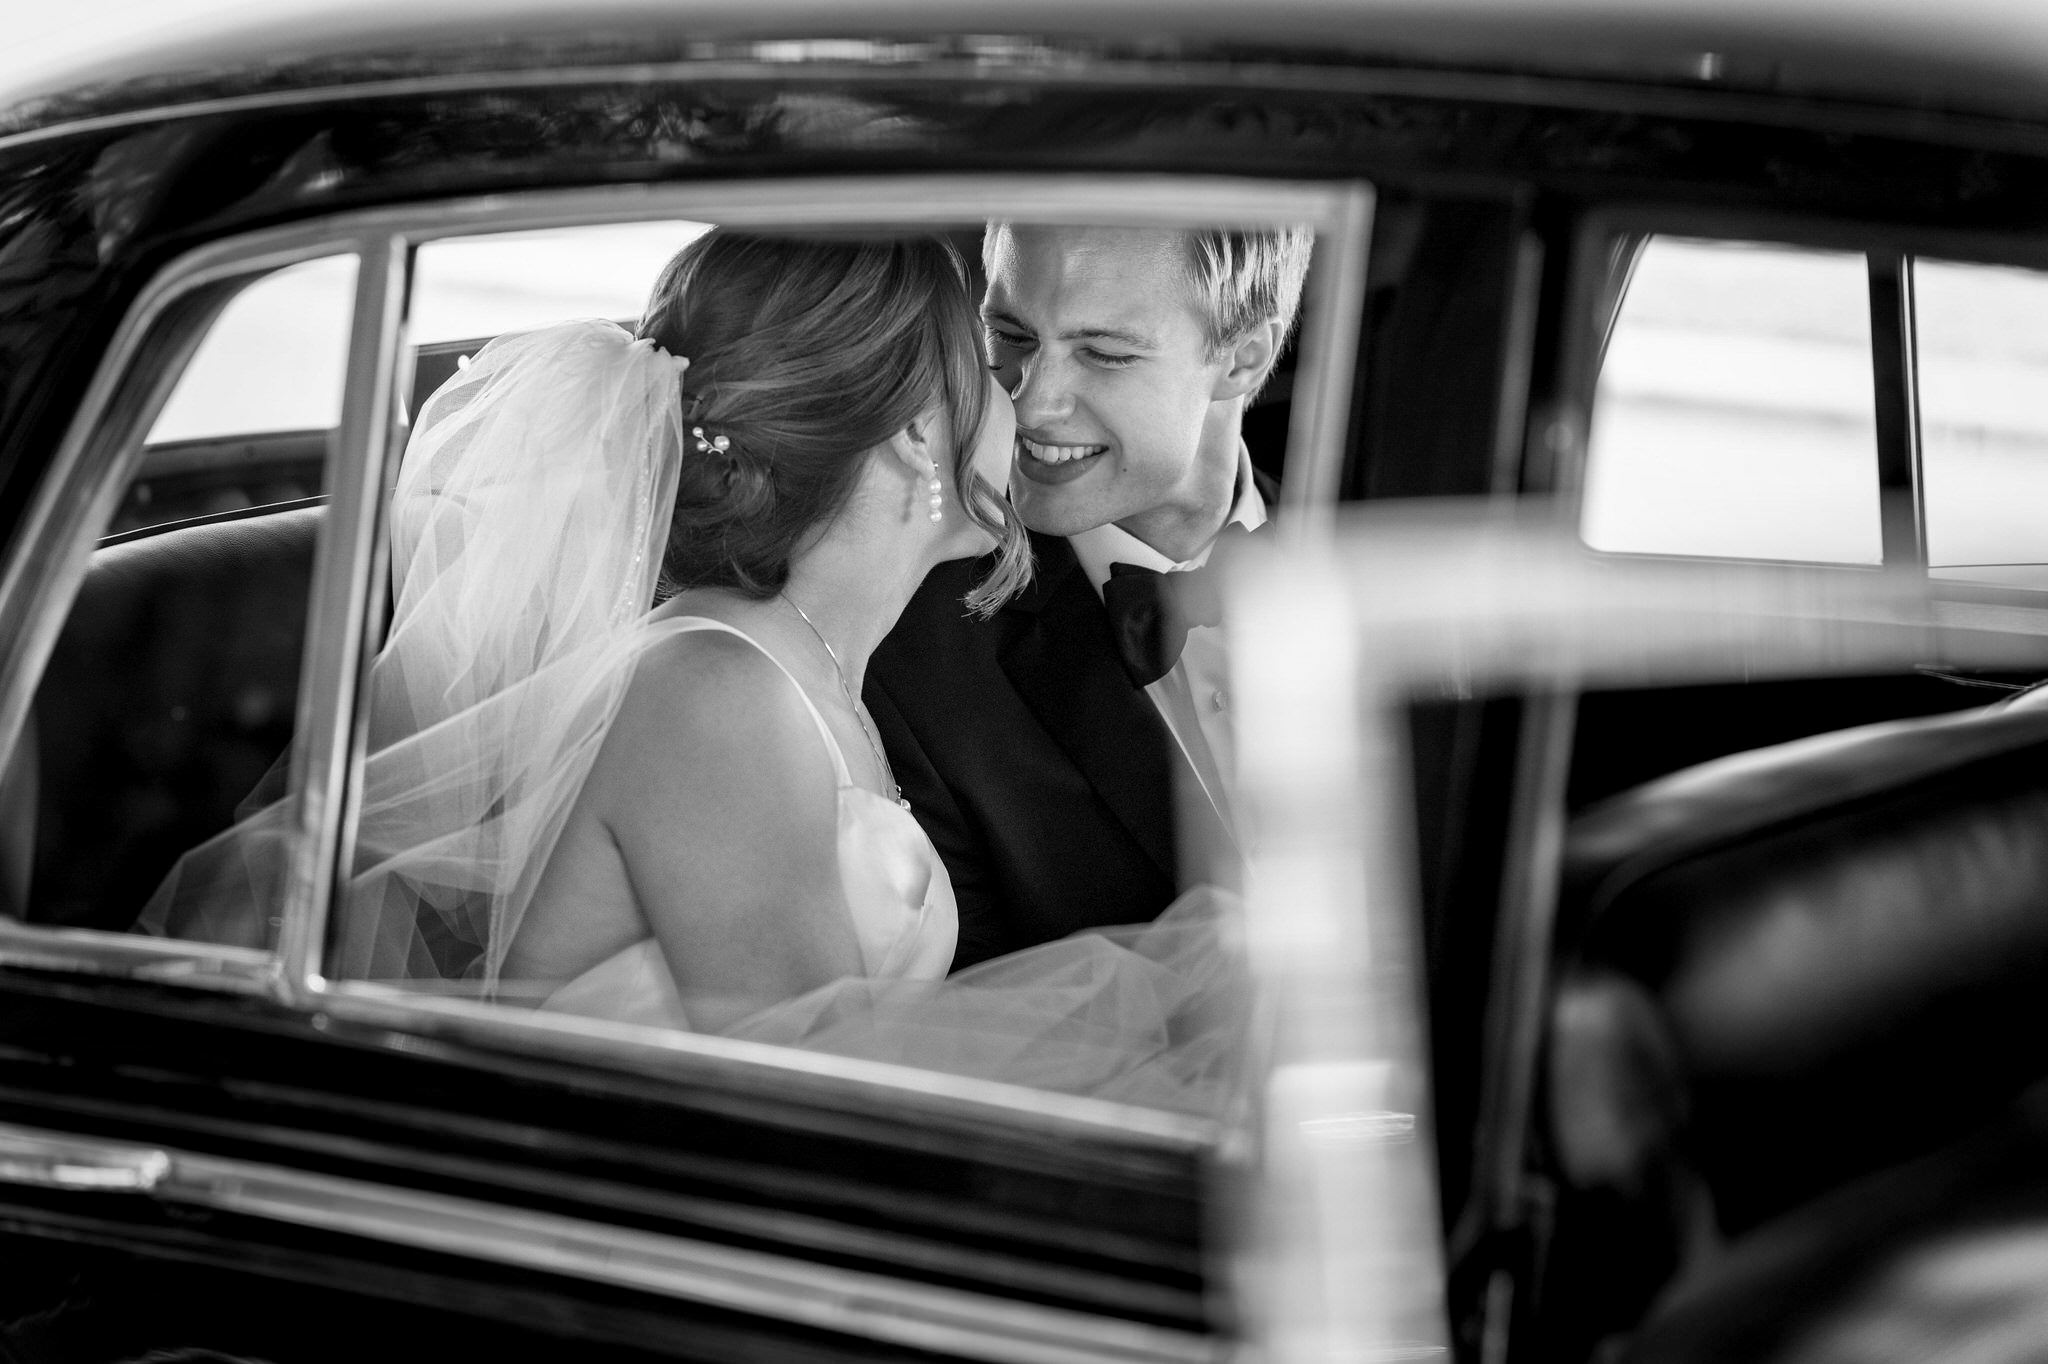 Shot through the car window, a groom smiles at his bride on their wedding day.  